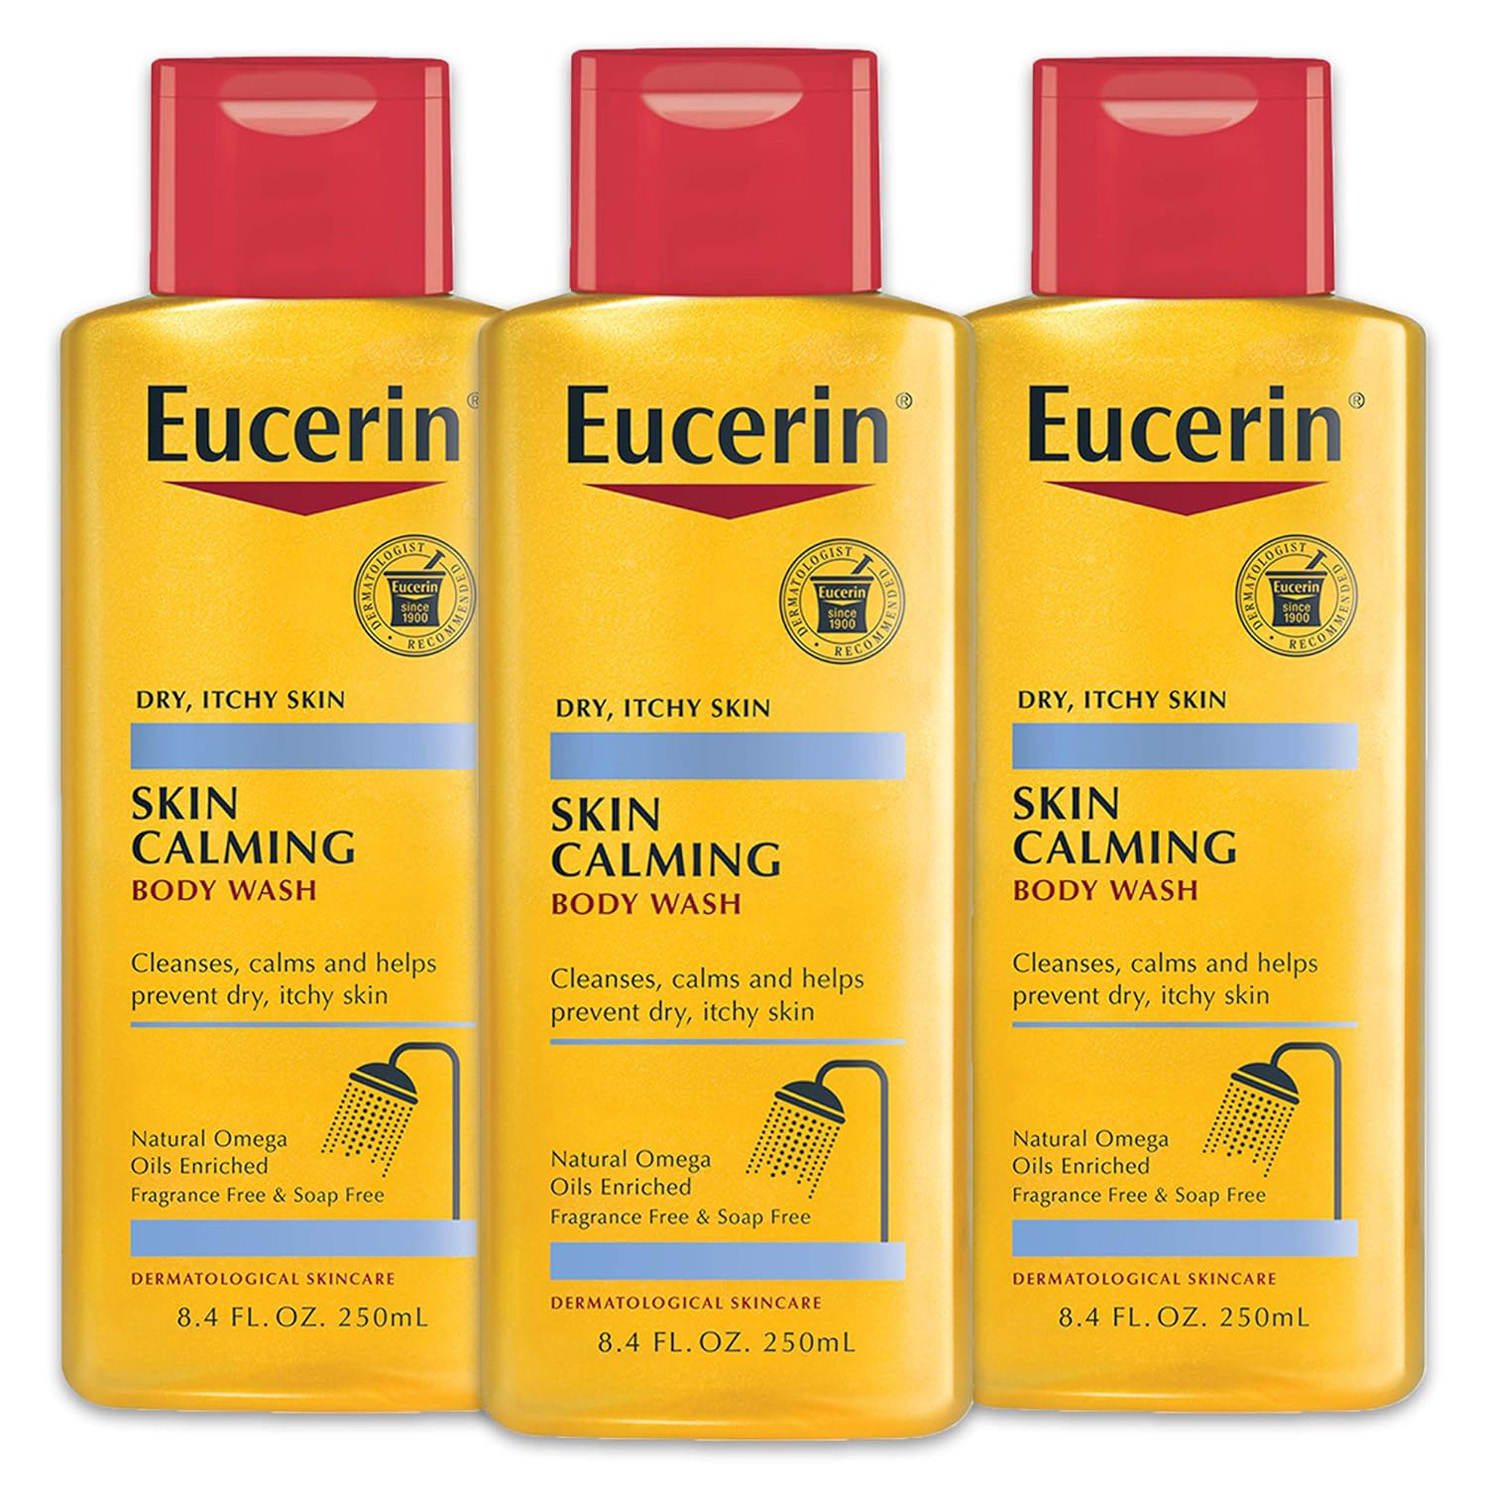 Eucerin Skin Calming Body Wash – Cleanses and Calms to Help Prevent Dry